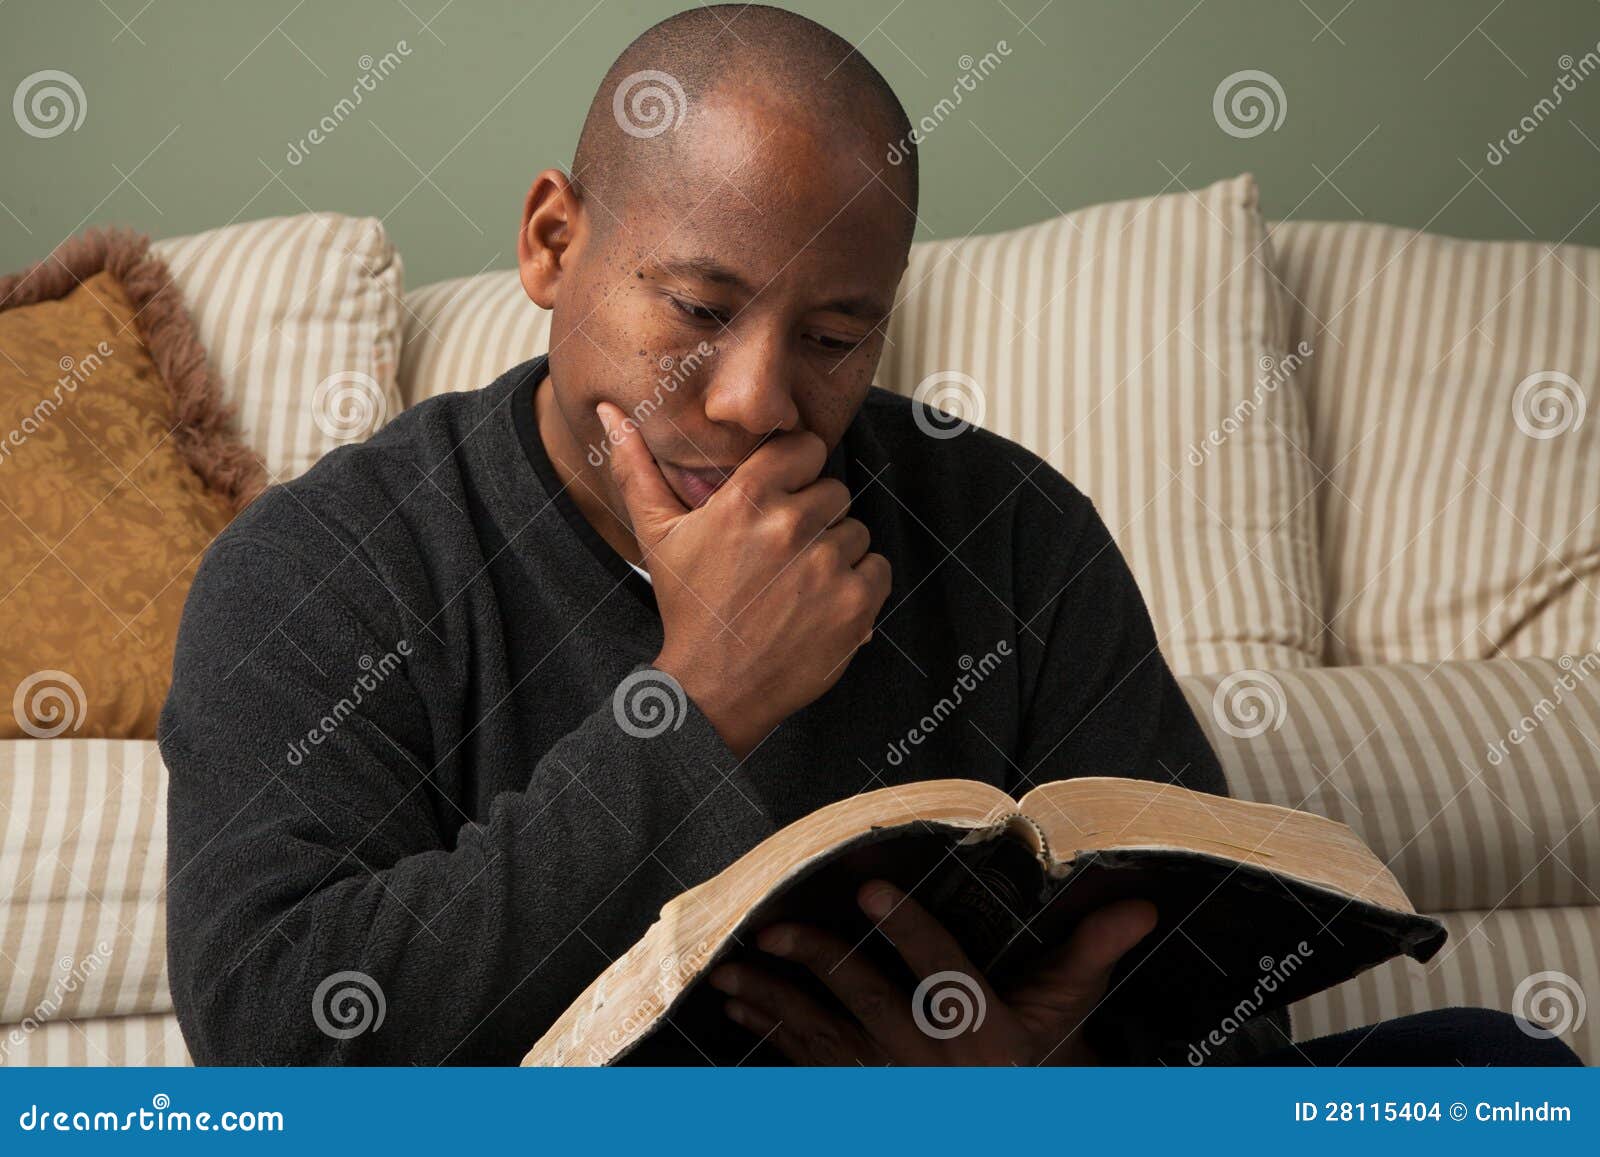 man studying the bible